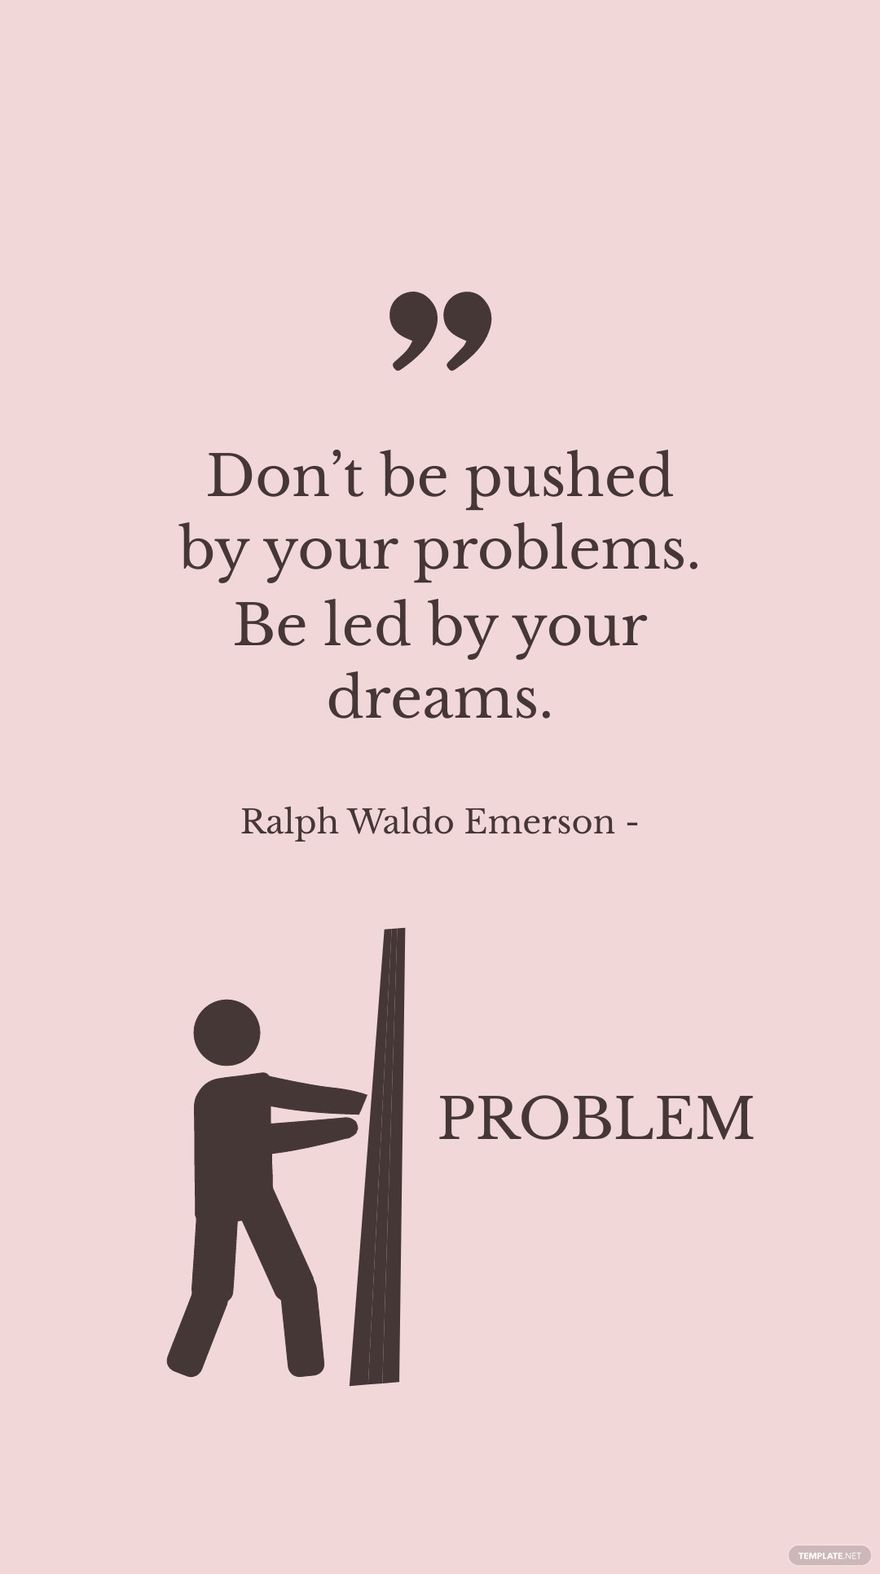 Ralph Waldo Emerson - Don’t be pushed by your problems. Be led by your dreams.